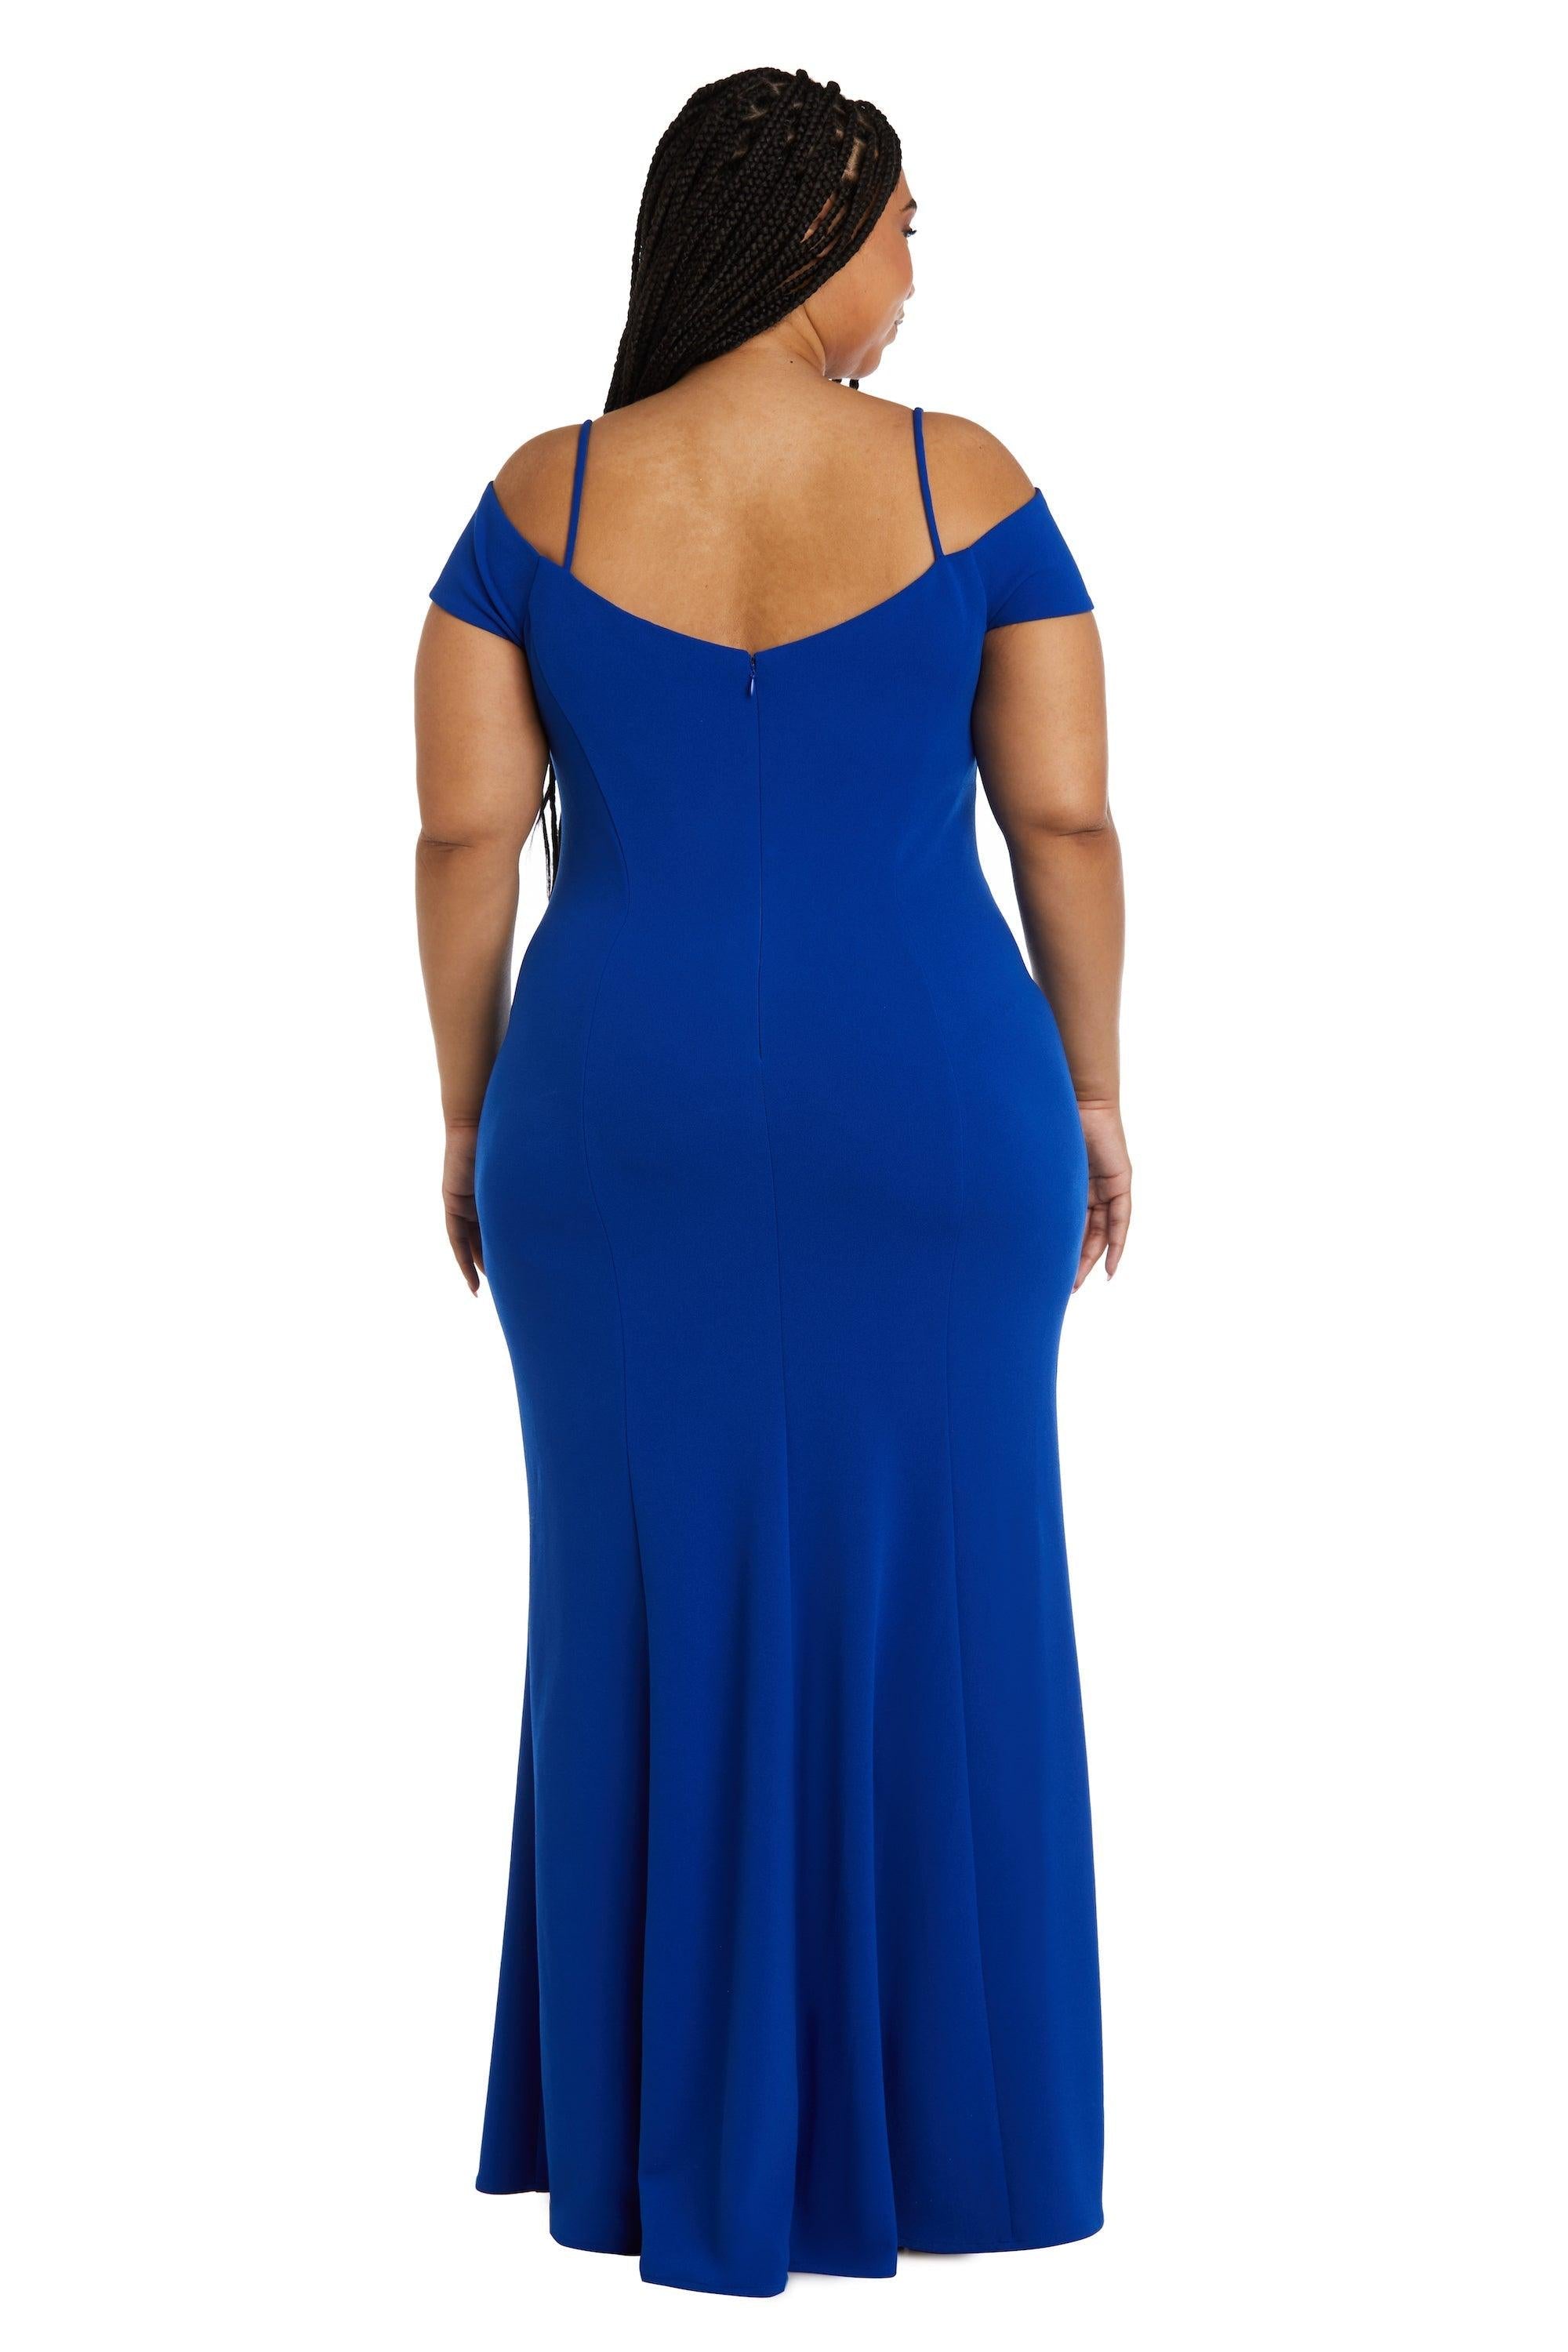 Nightway Plus Size Evening Long Dress Sale 21825W - The Dress Outlet